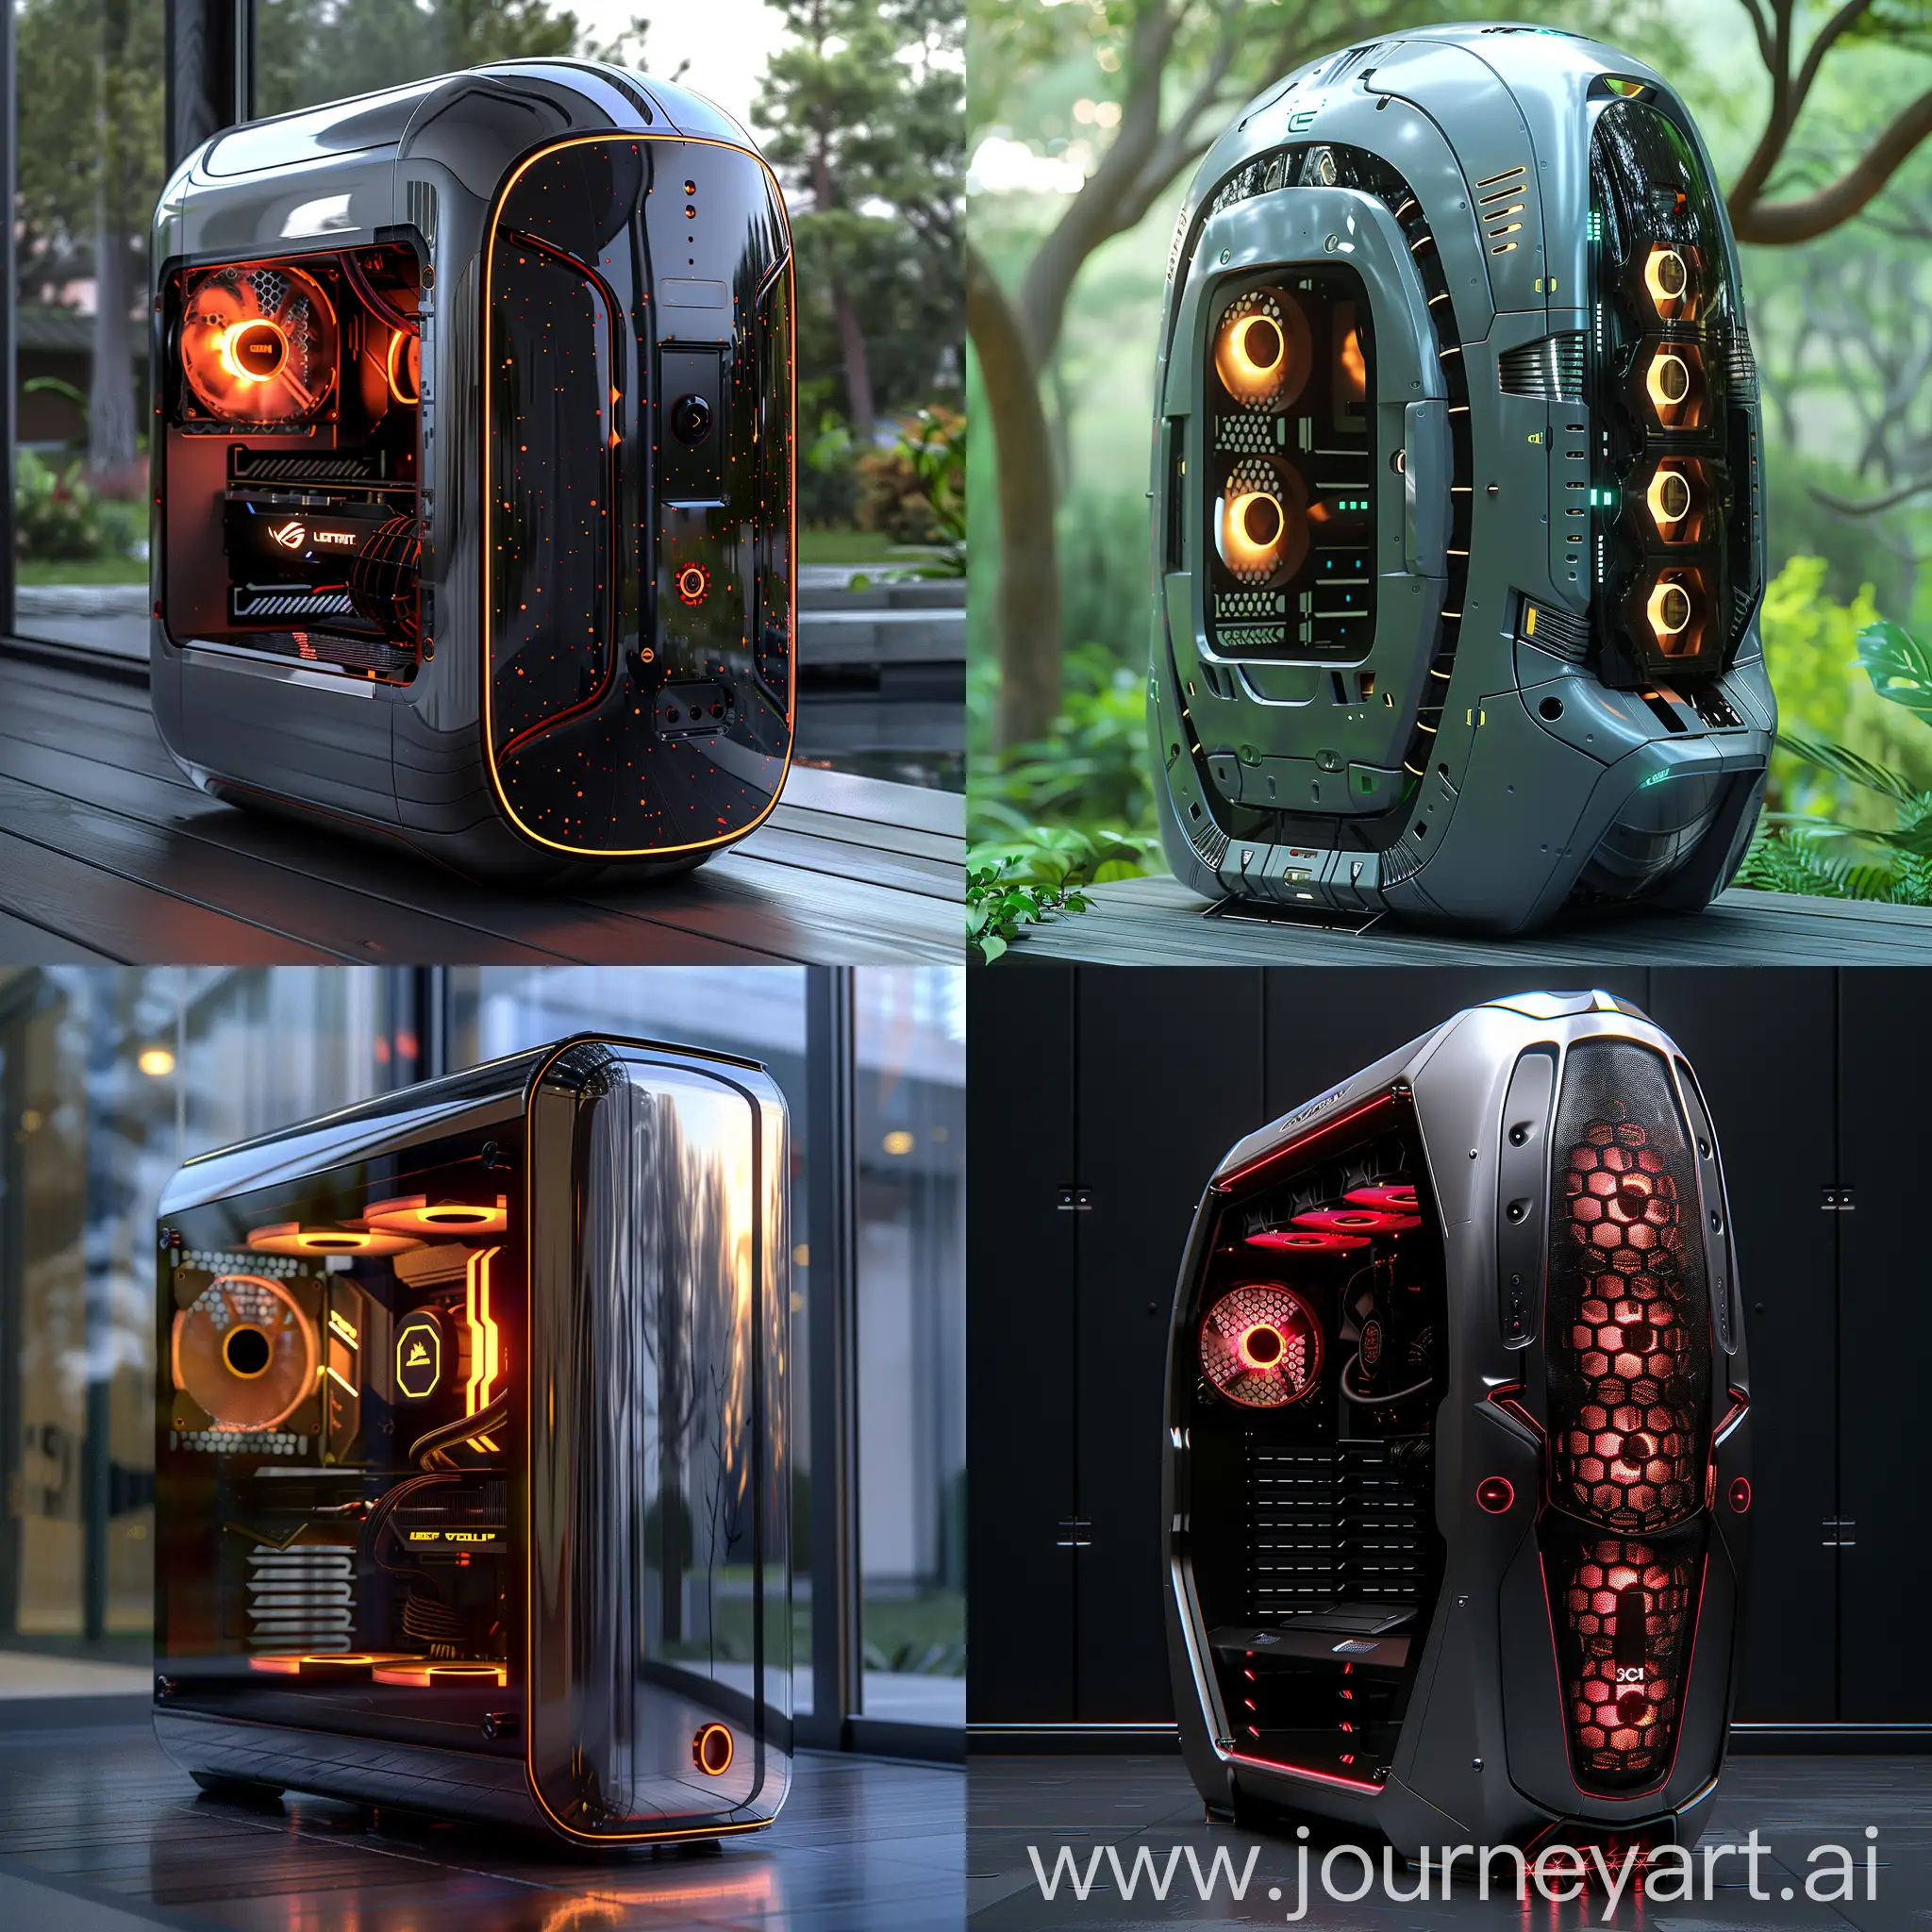 Futuristic-Stainless-Steel-PC-Case-with-Smart-Materials